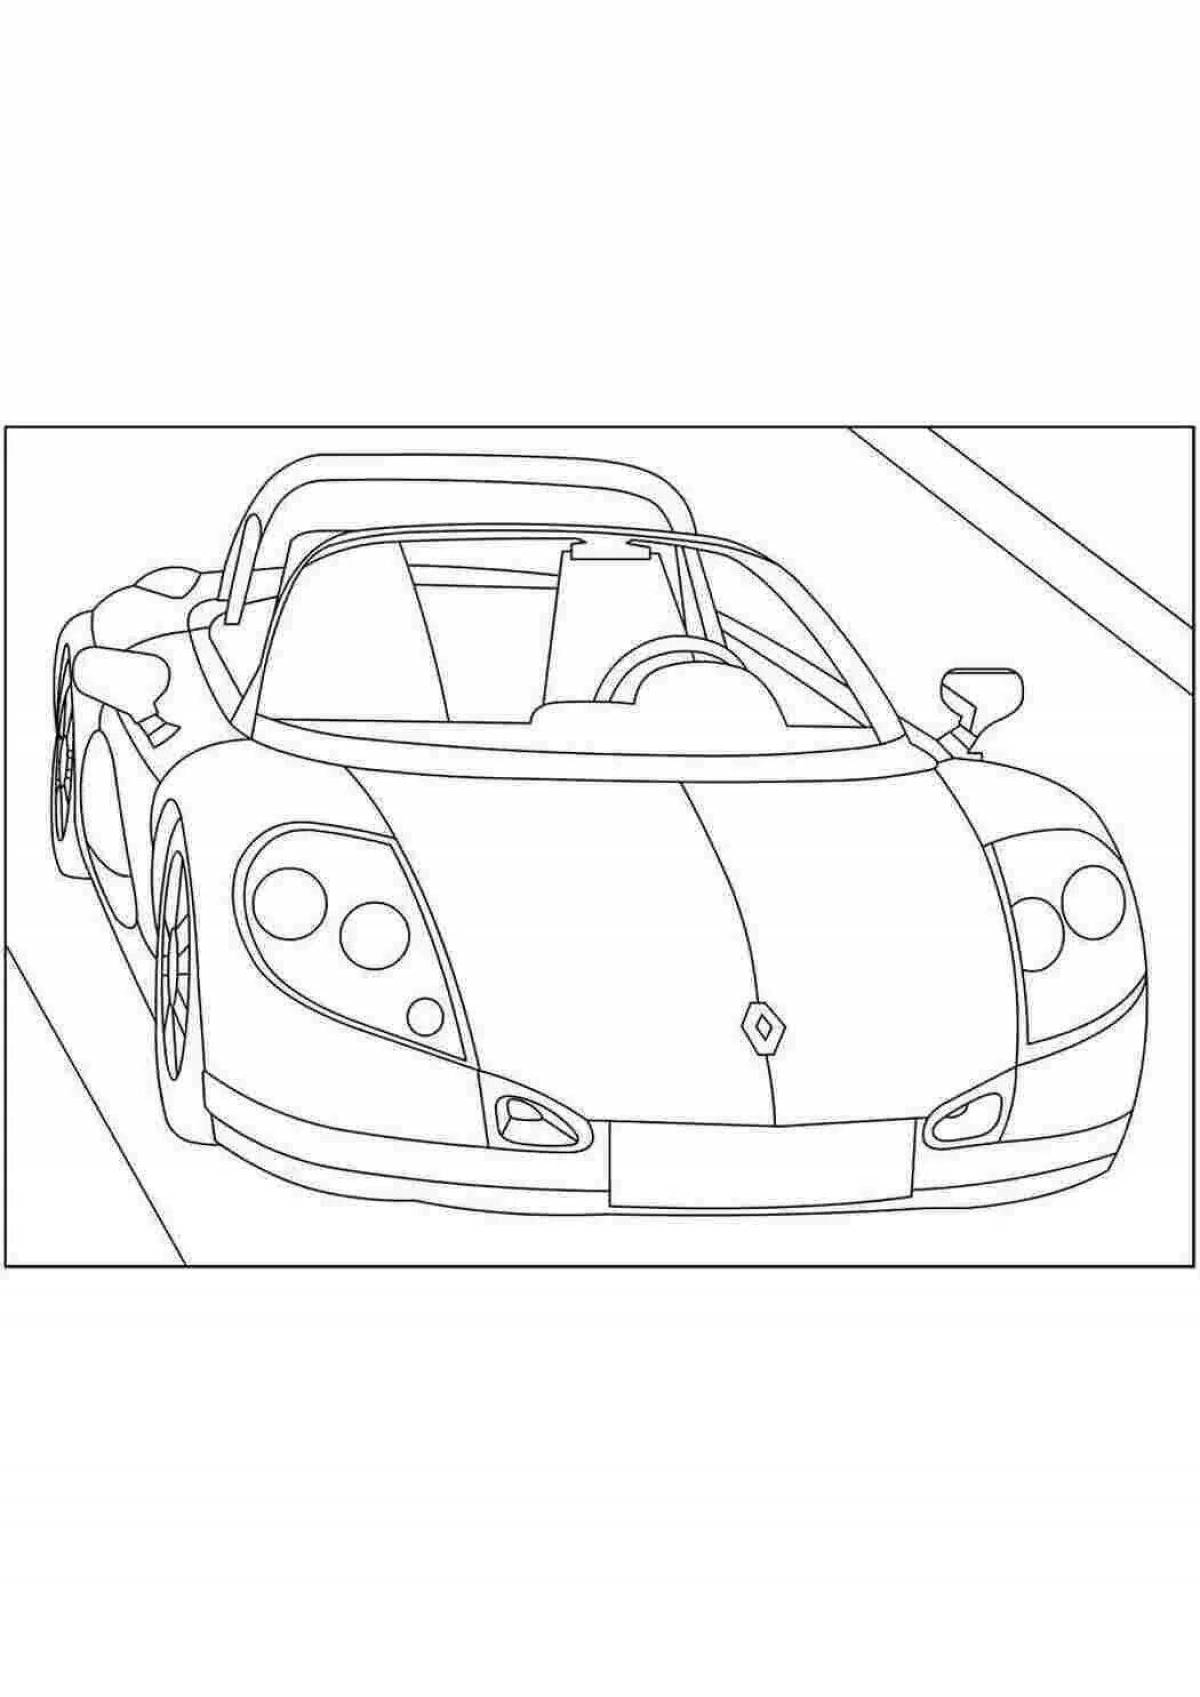 Exciting car coloring pages 6 years old